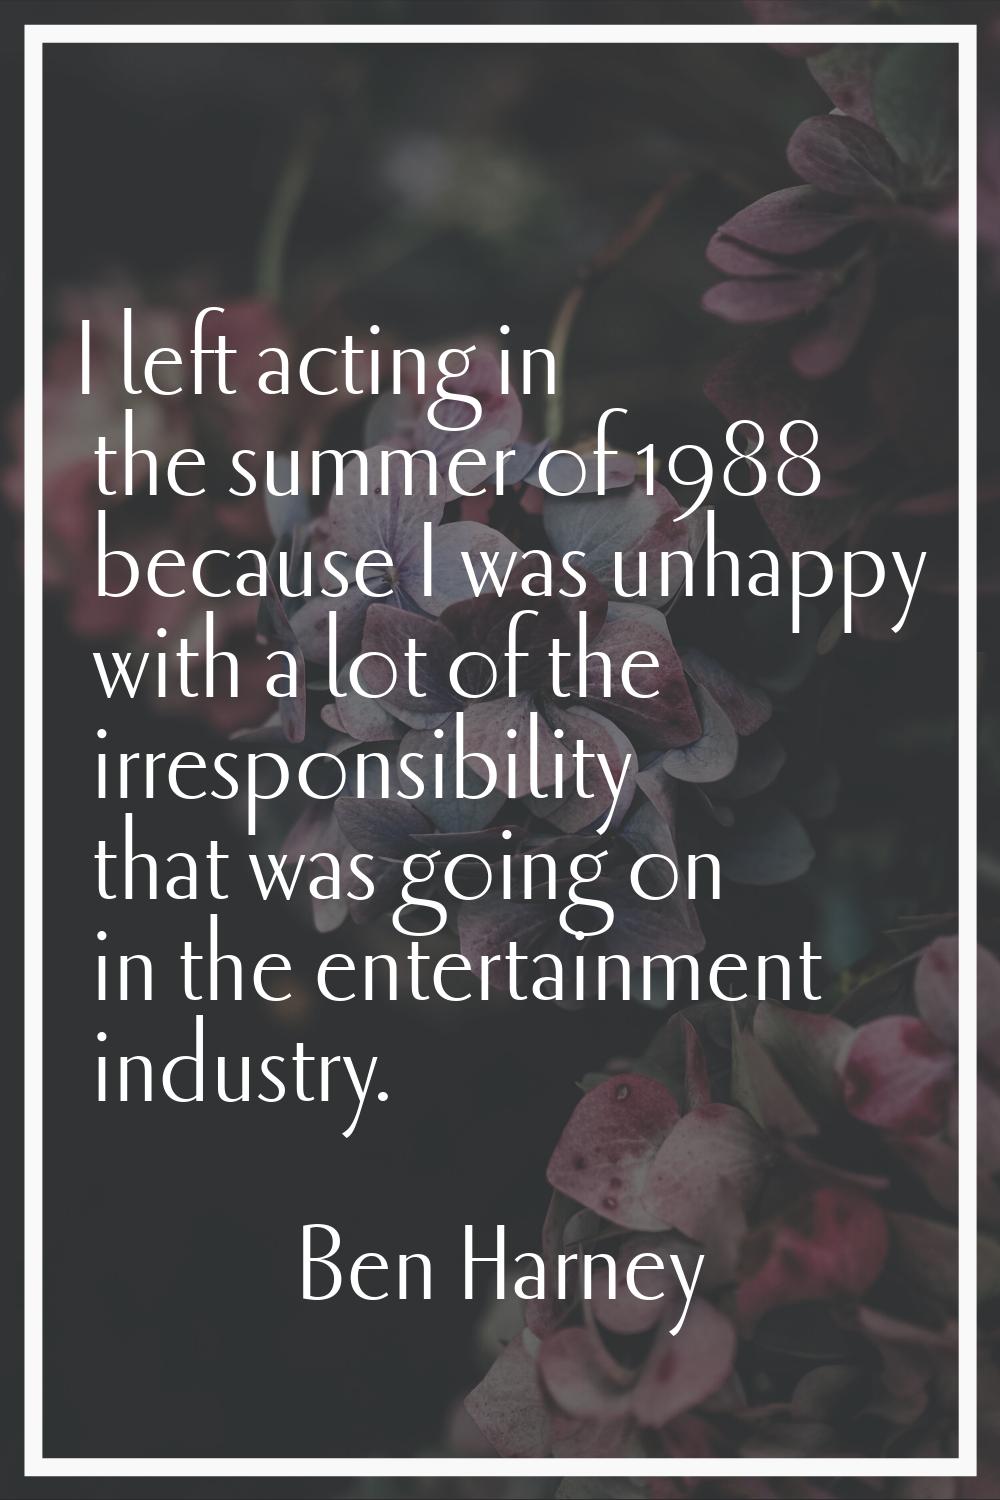 I left acting in the summer of 1988 because I was unhappy with a lot of the irresponsibility that w